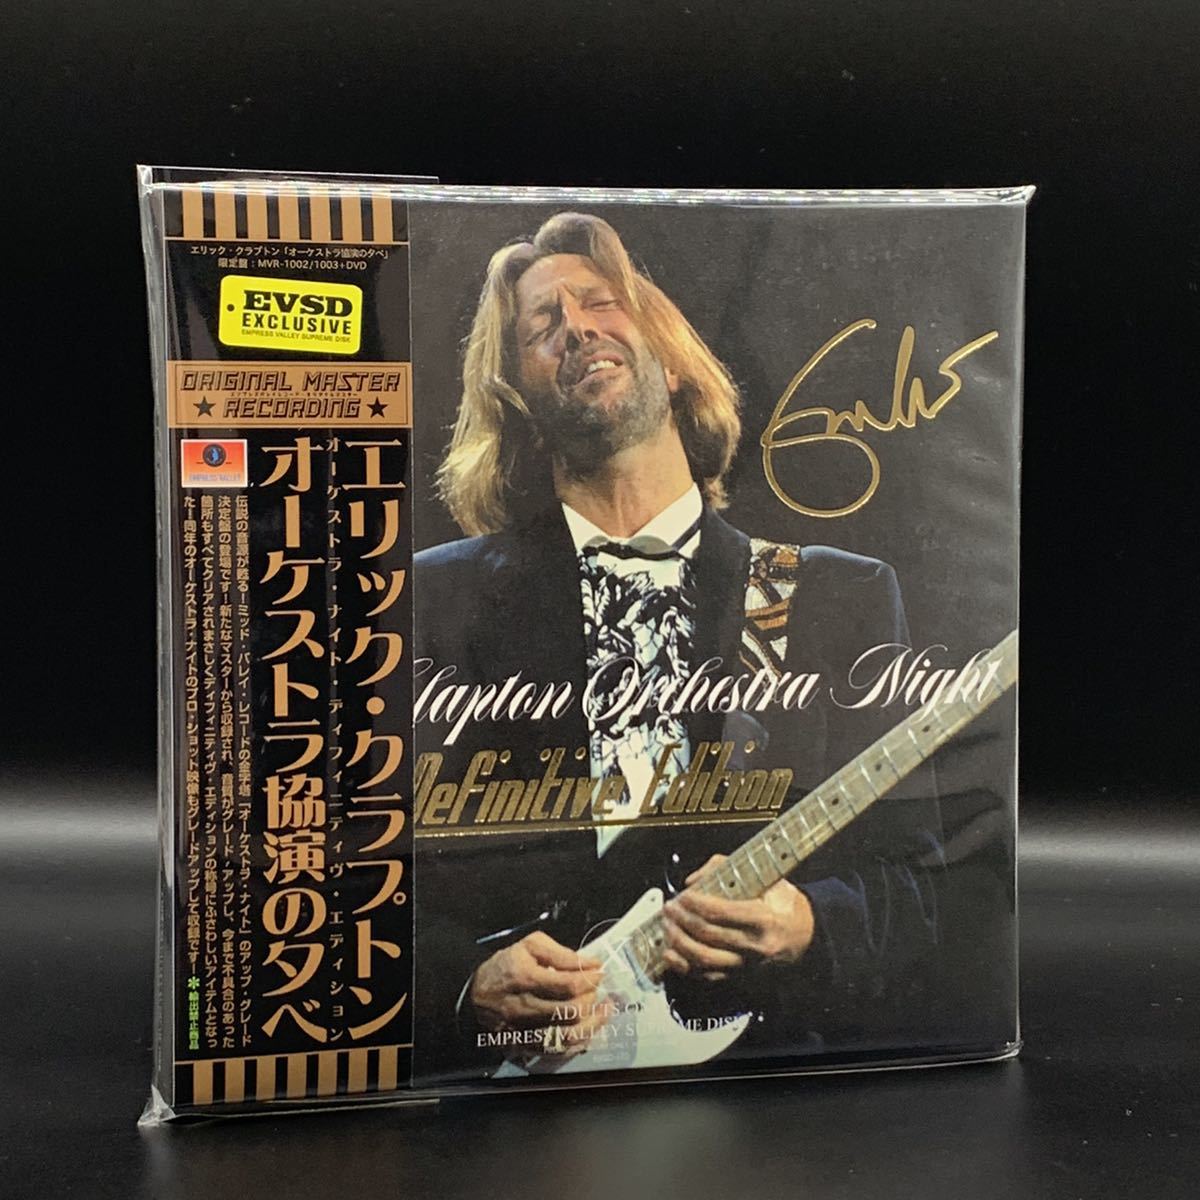 ERIC CLAPTON - ORCHESTRA NIGHT DEFINITIVE EDITION ( 2CDDVD MID 